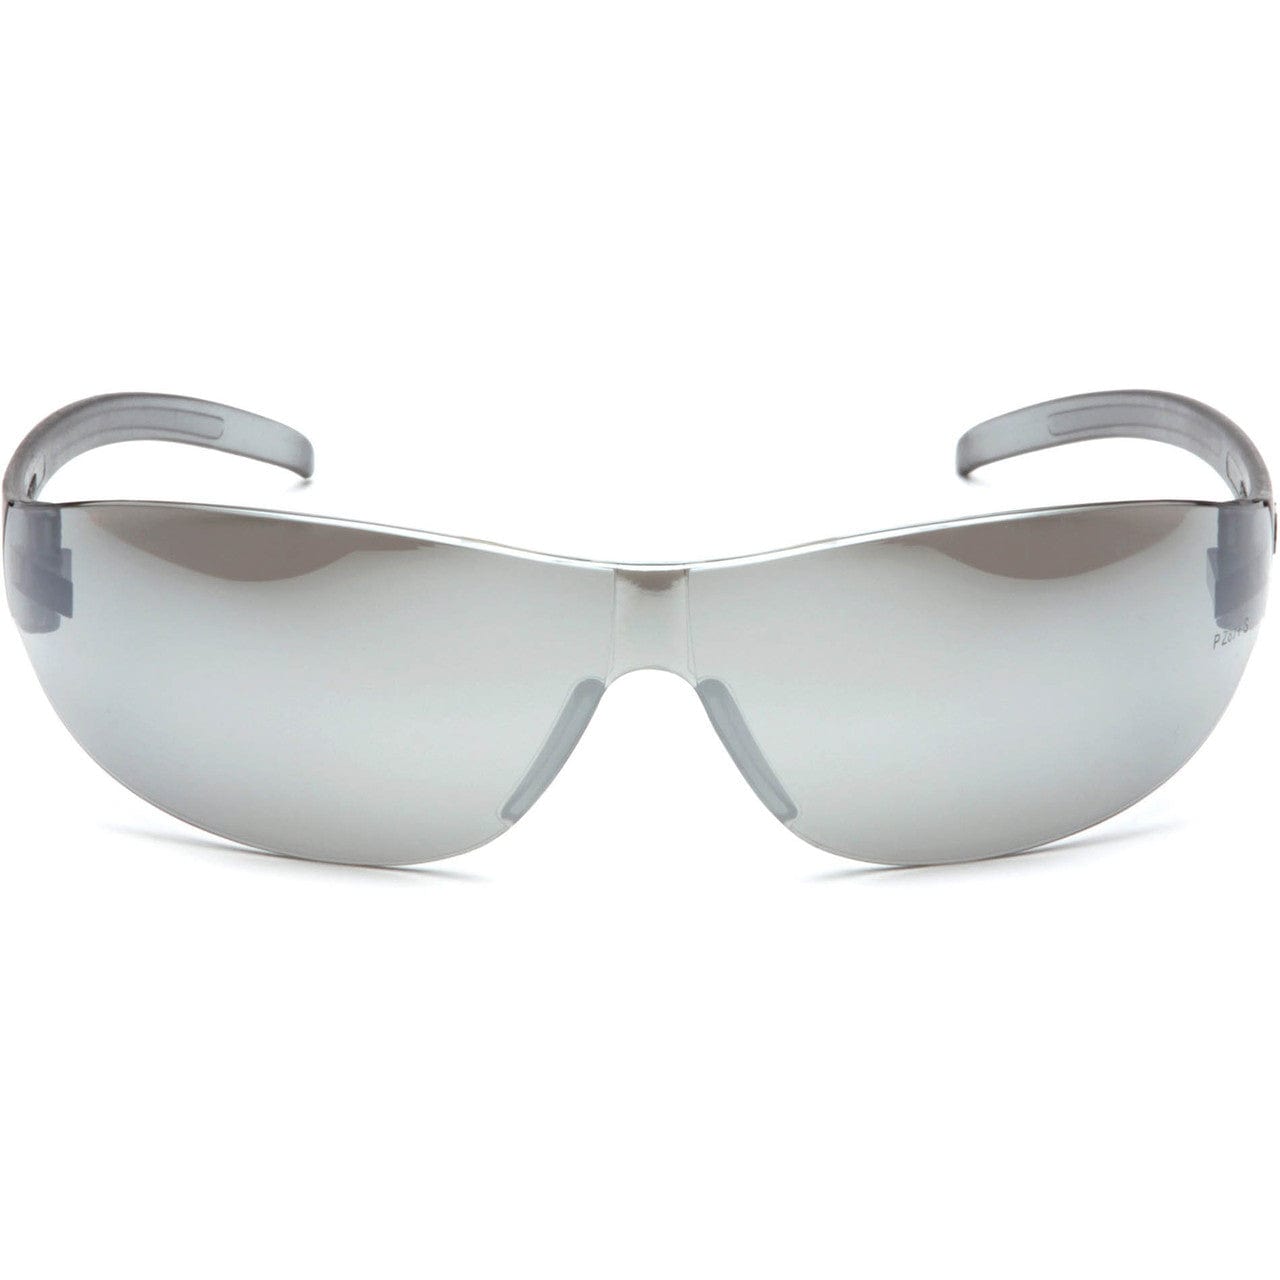 Pyramex Alair Safety Glasses with Silver Mirror Lens S3270S Front View